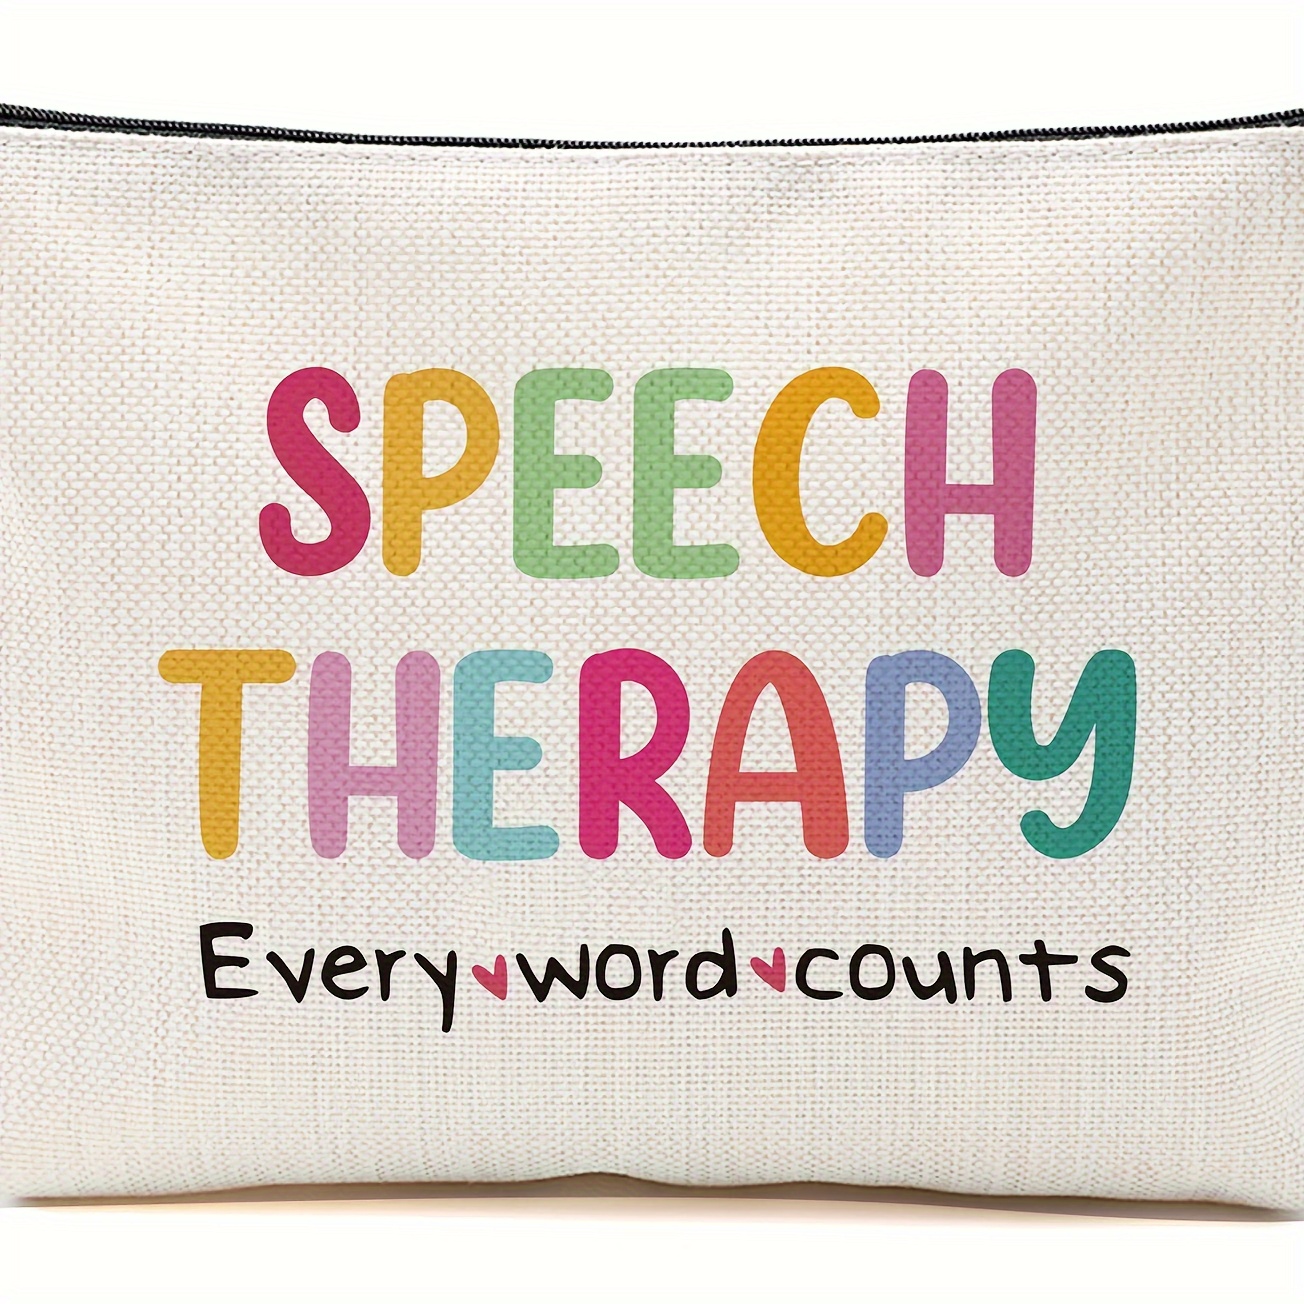 

1pc speech Therapy Gift Speech Therapist Gift For Women, Speech Language Pathologist Cosmetic Bag - Speech Therapy Every Word Counts, Birthday Christmas Birthday Thanksgiving Gifts For Slp Makeup Bag